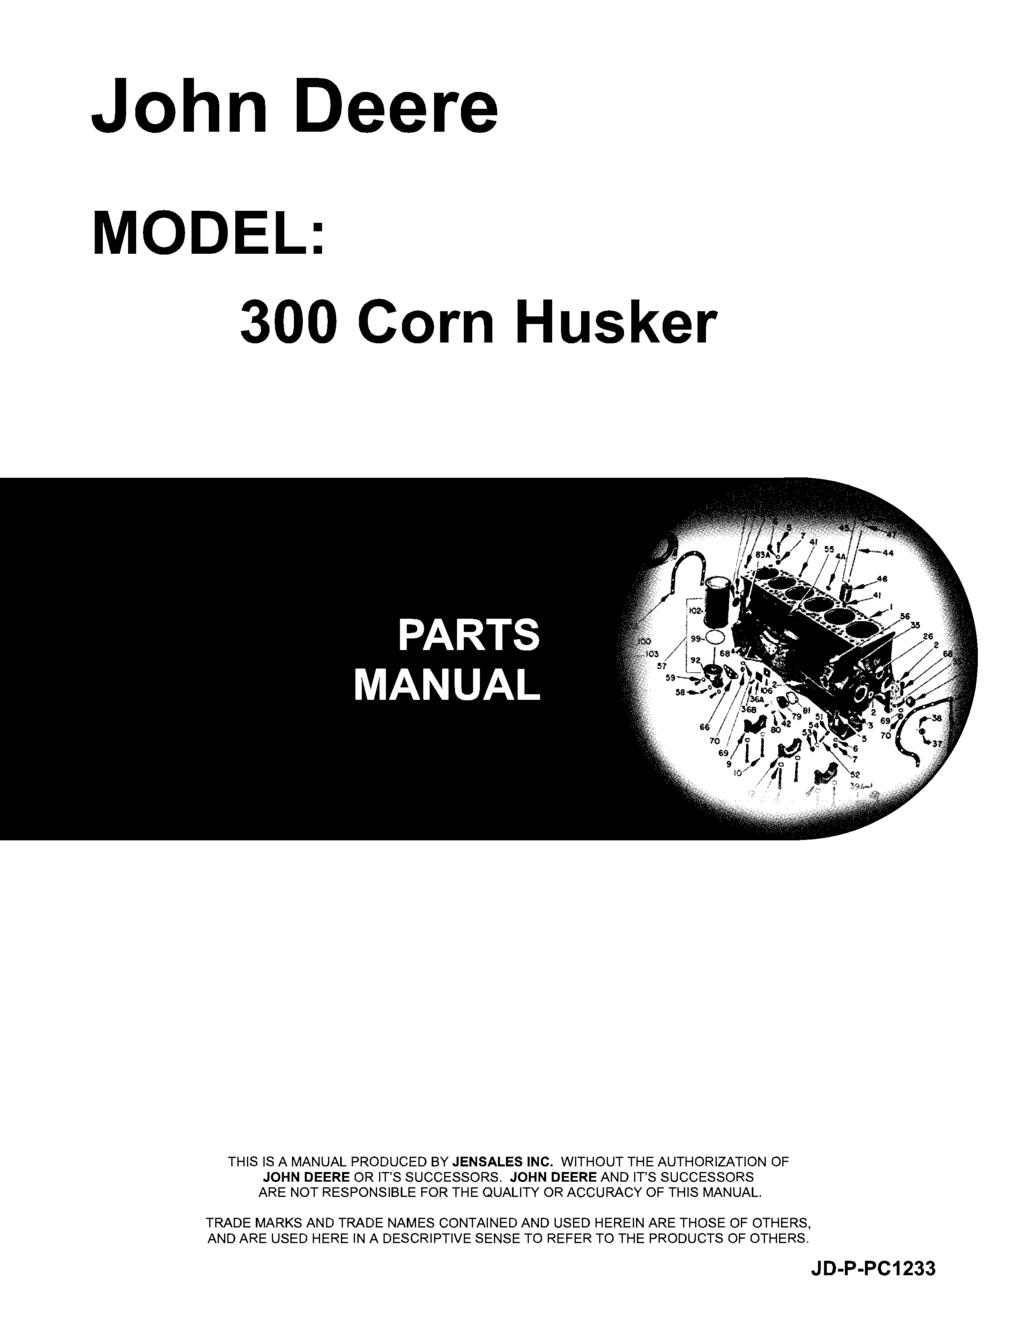 John Deere MODEL: 300 Corn Husker THIS IS A MANUAL PRODUCED BY JENSALES INC. WITHOUT THE AUTHORIZATION OF JOHN DEERE OR IT'S SUCCESSORS.